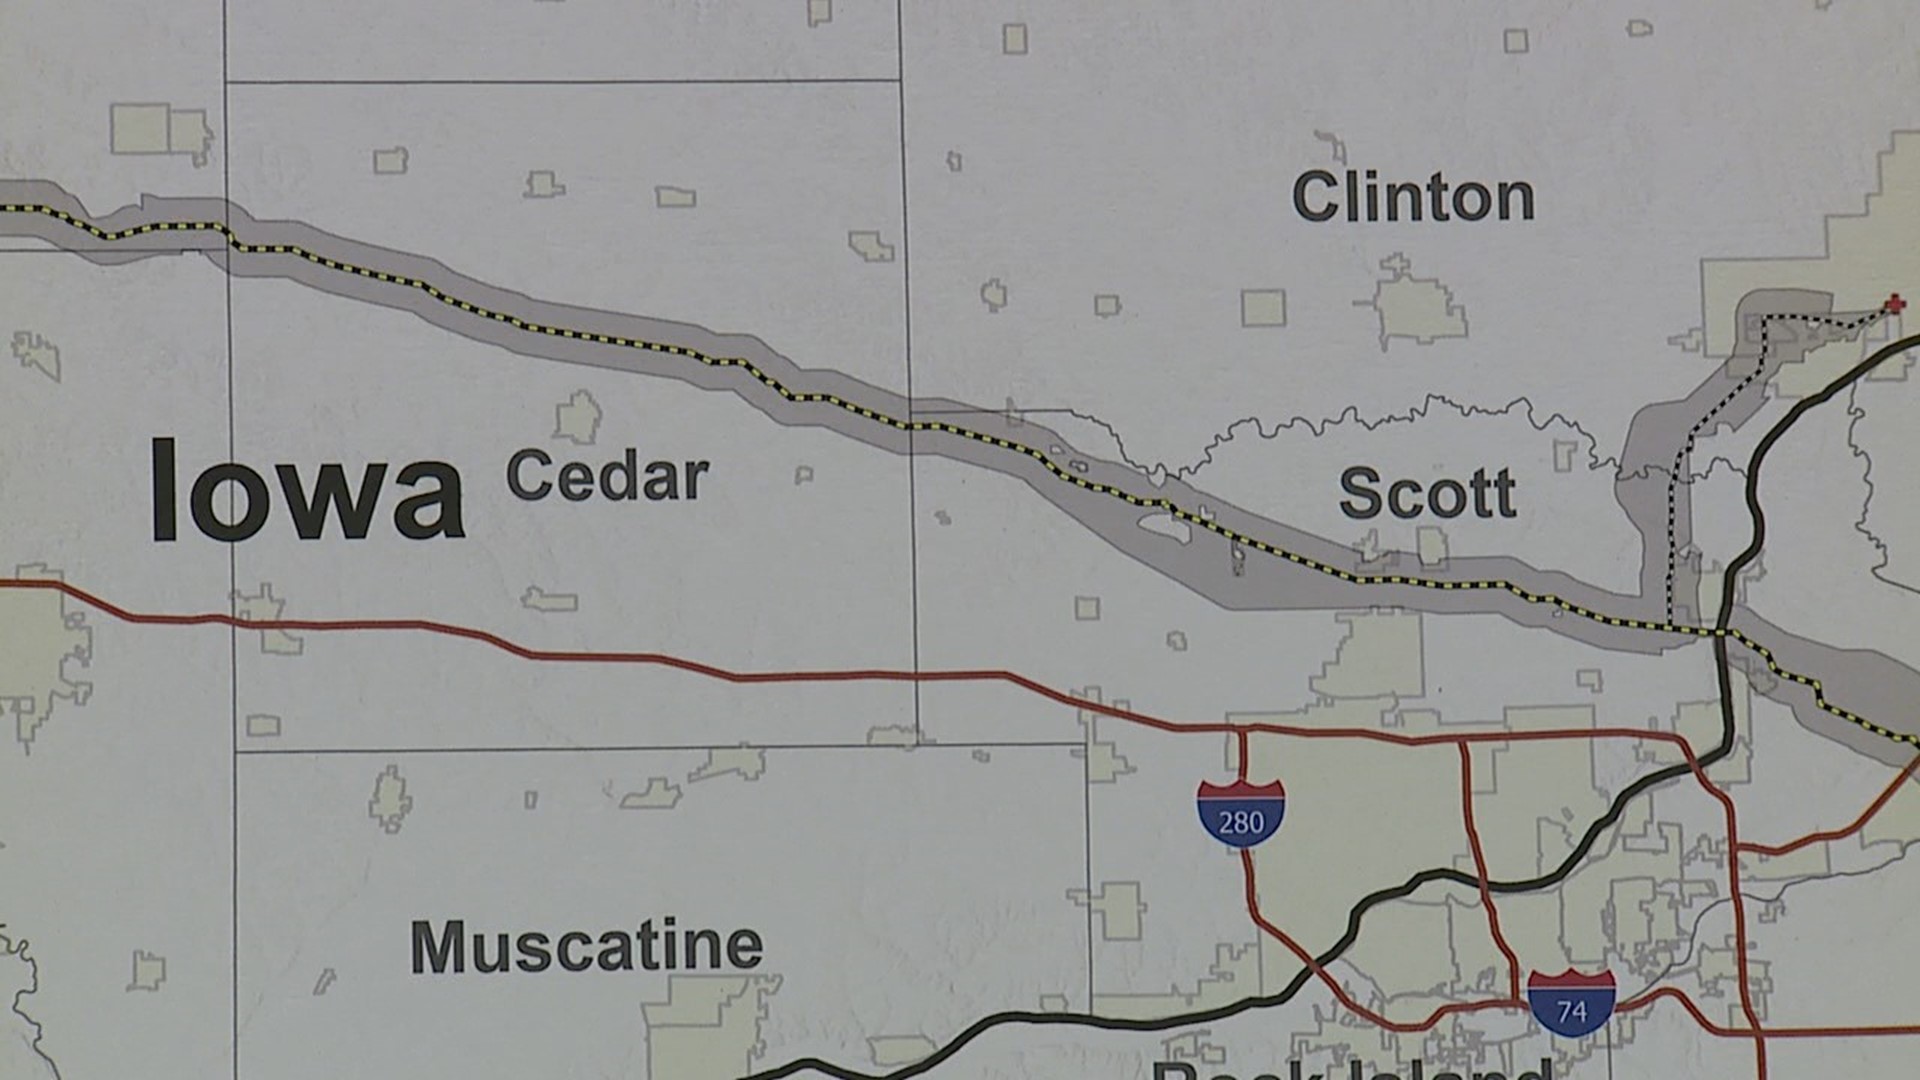 The carbon capture pipeline proposed to pass through Scott County would transport liquid carbon dioxide from ethanol plants in Cedar Rapids and Clinton.